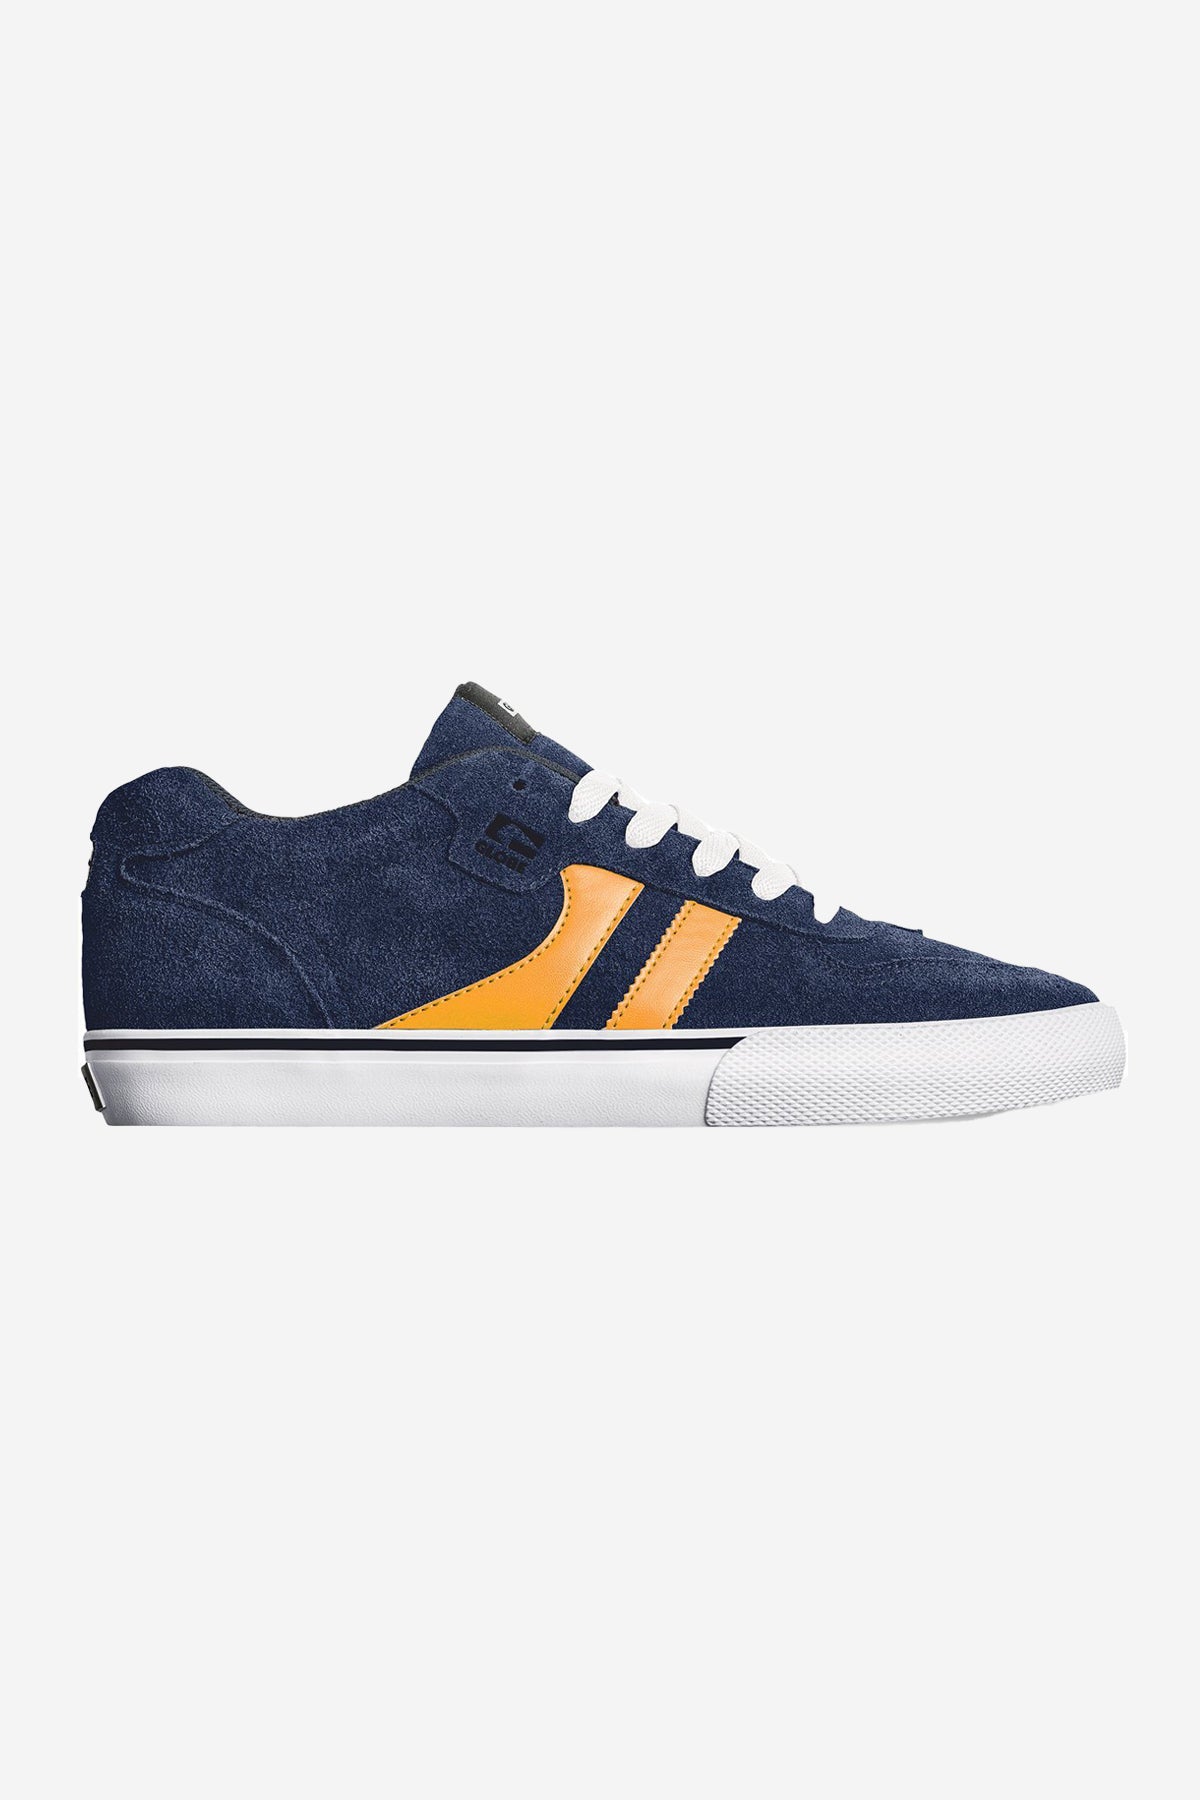 encore-2 navy yellow skate shoes